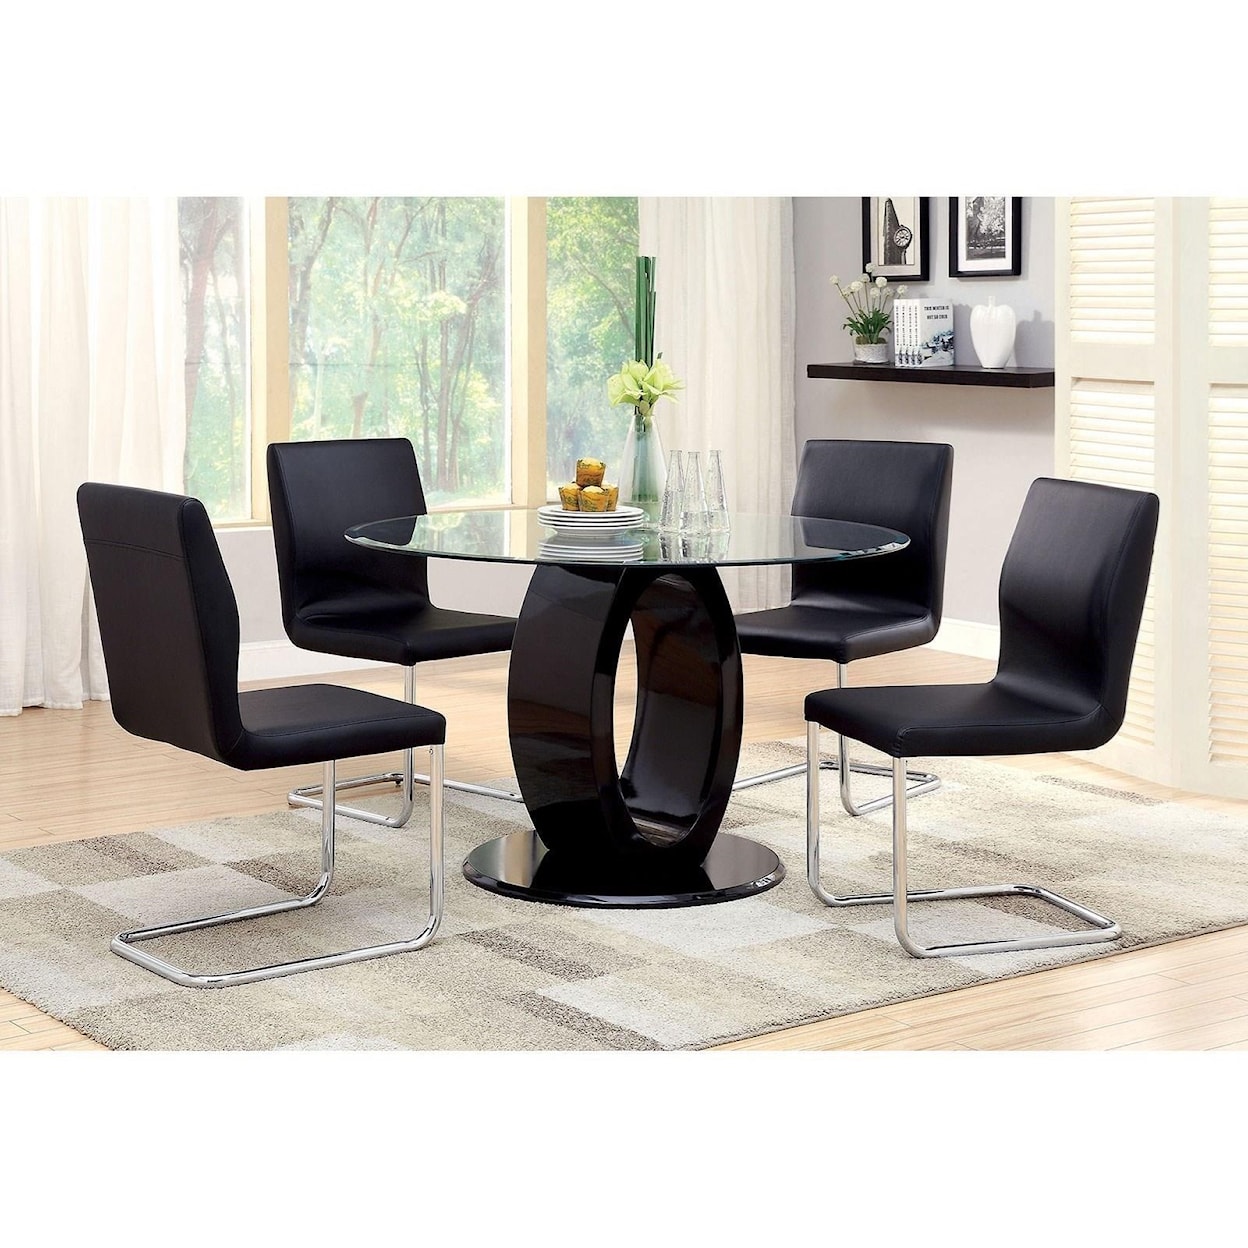 Furniture of America Lodia I Round Table w/ Glass Top